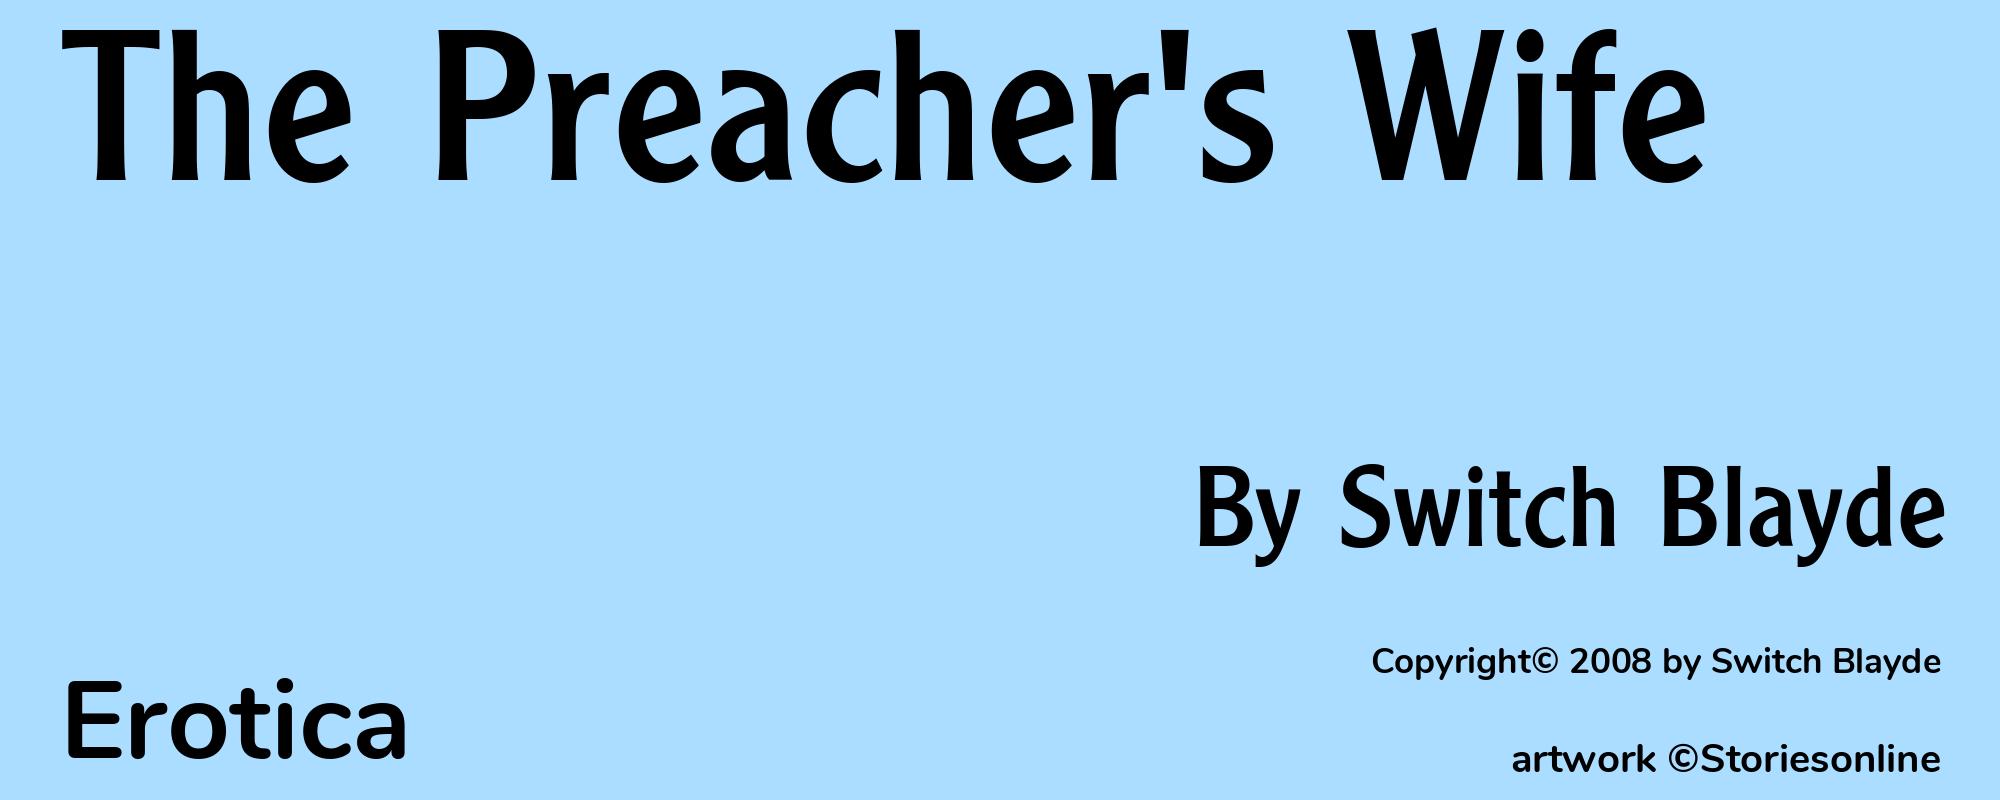 The Preacher's Wife - Cover